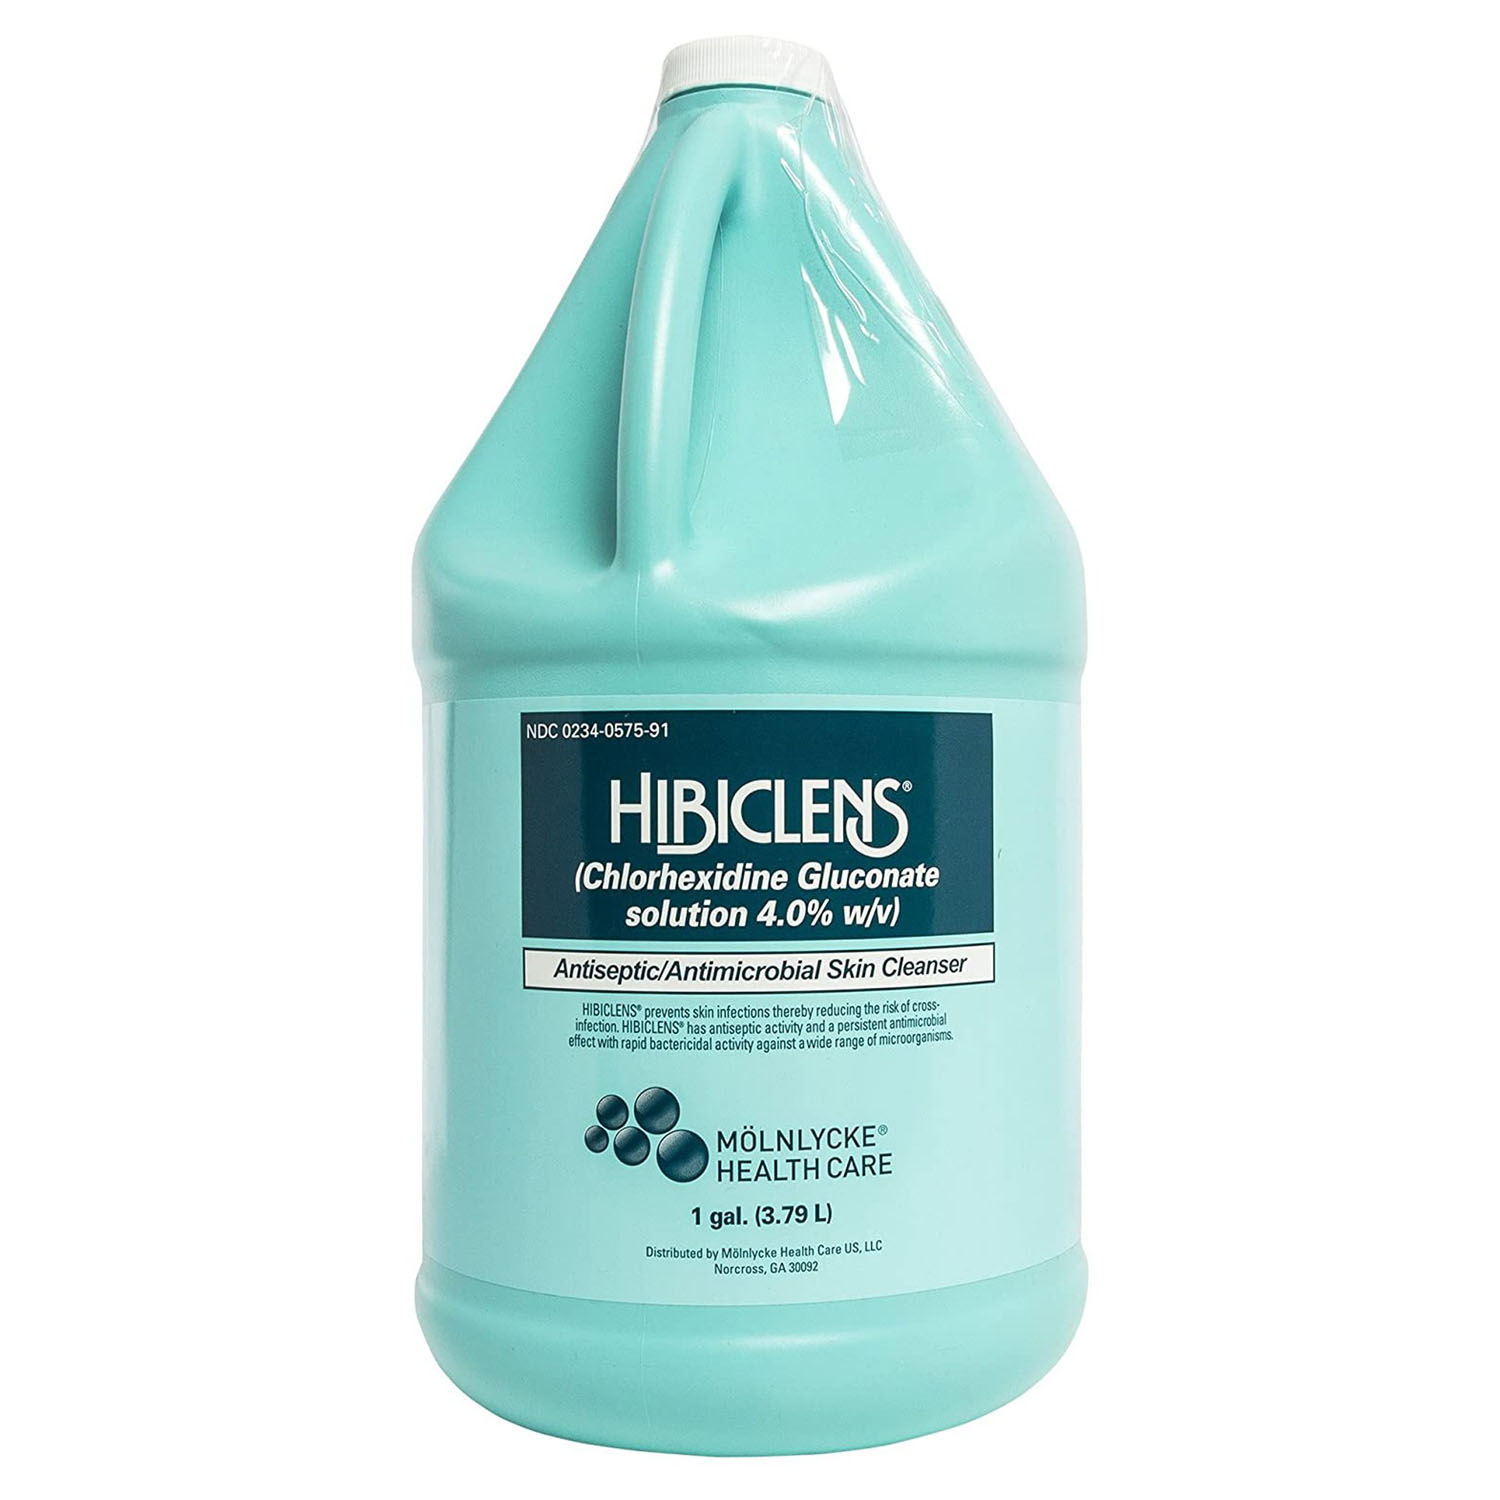 MOLNLYCKE HIBICLENS ANTISEPTIC ANTIMICROBIAL SKIN CLEANSER : 57591 CS $224.64 Stocked